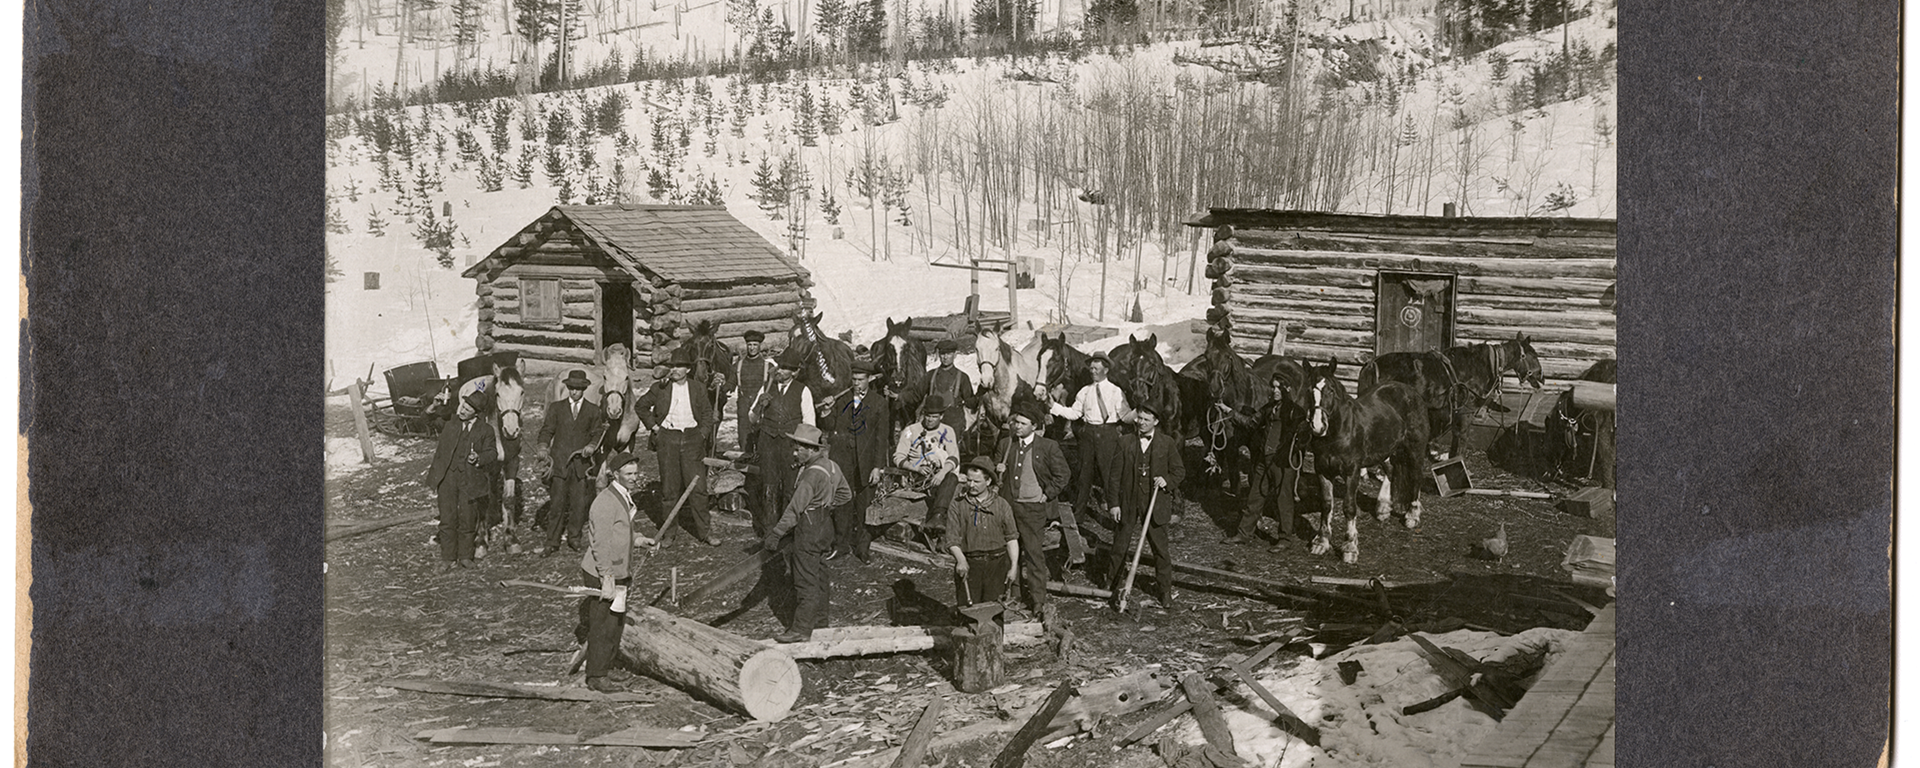 "Logging at Blairmore, Alberta.", [ca. 1900-1905] (CU1229519) by Photographer Unknown. Courtesy of Libraries and Cultural Resources Digital Collections, University of Calgary